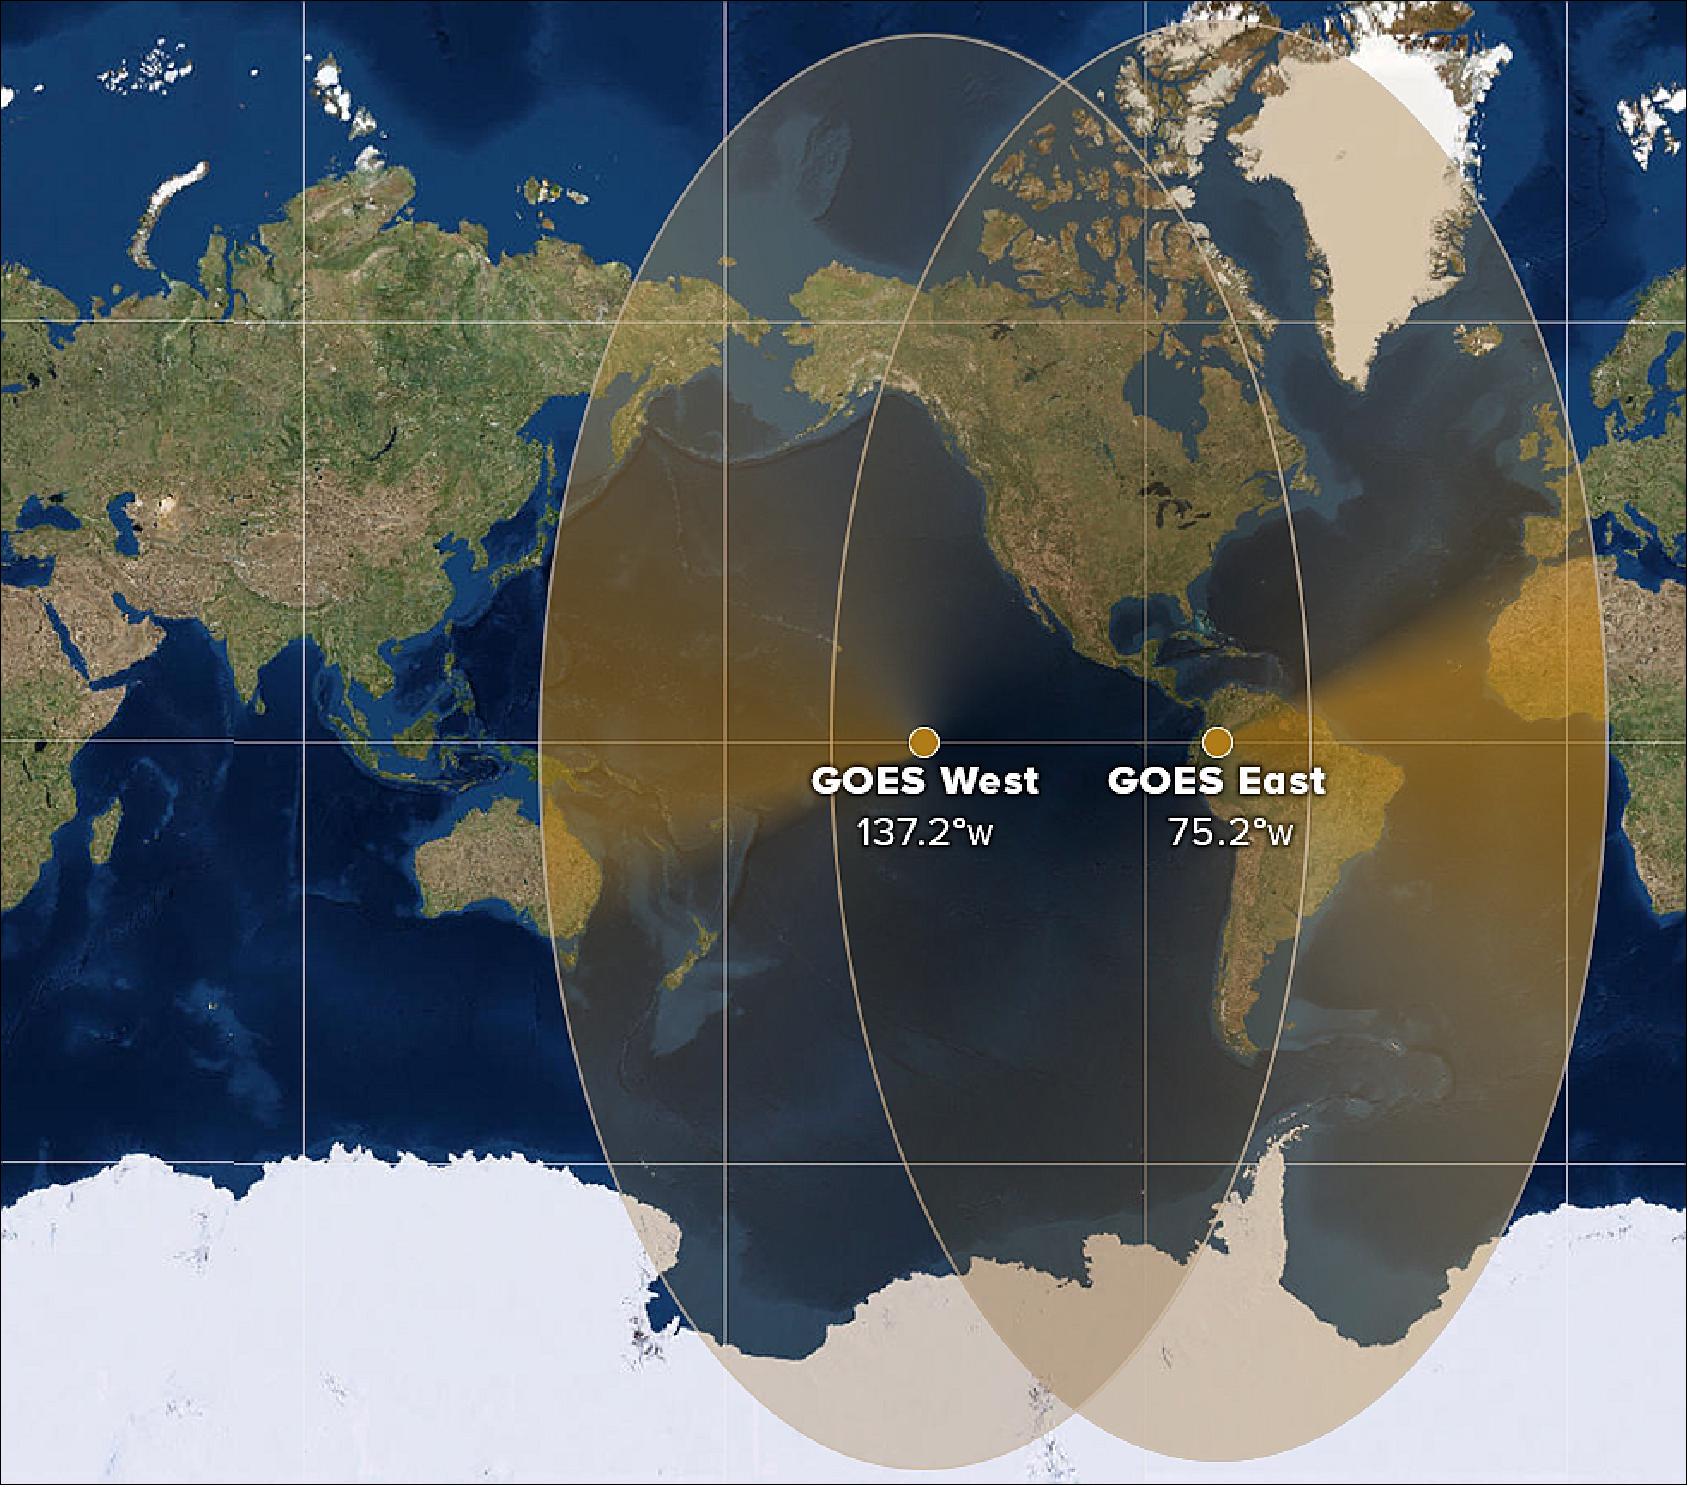 Figure 7: This maps shows the geographical coverage area of the GOES East and West satellites (image credit: NOAA)